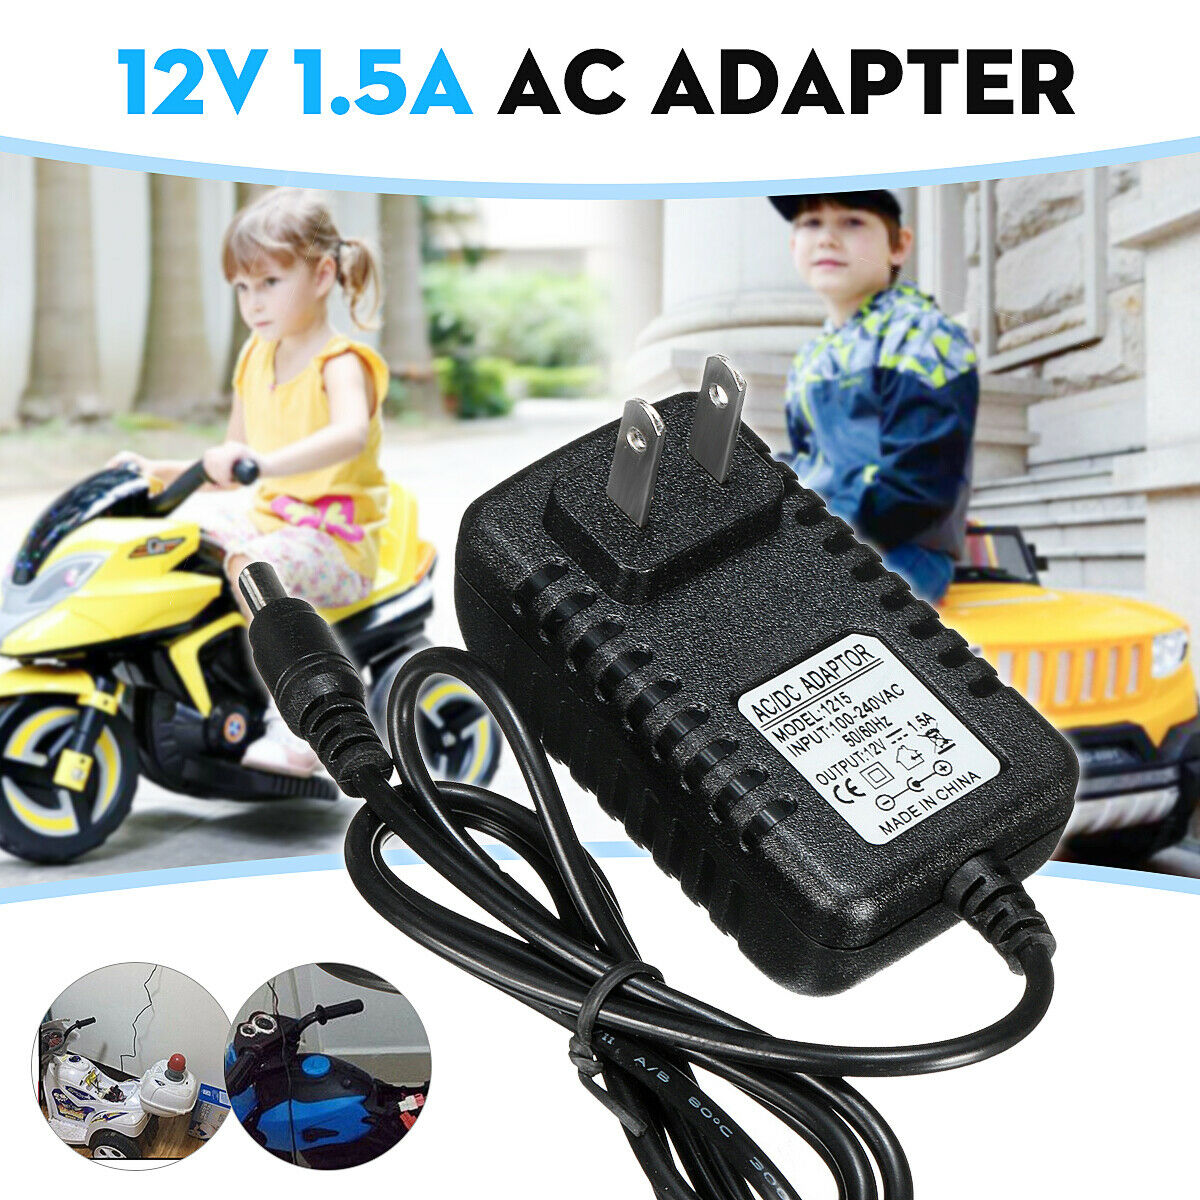 12V 1A Battery Charger Adapter For Kids ATV Quad Ride On Cars Motorcycle Brand: universal MPN: ME49 Contents of the